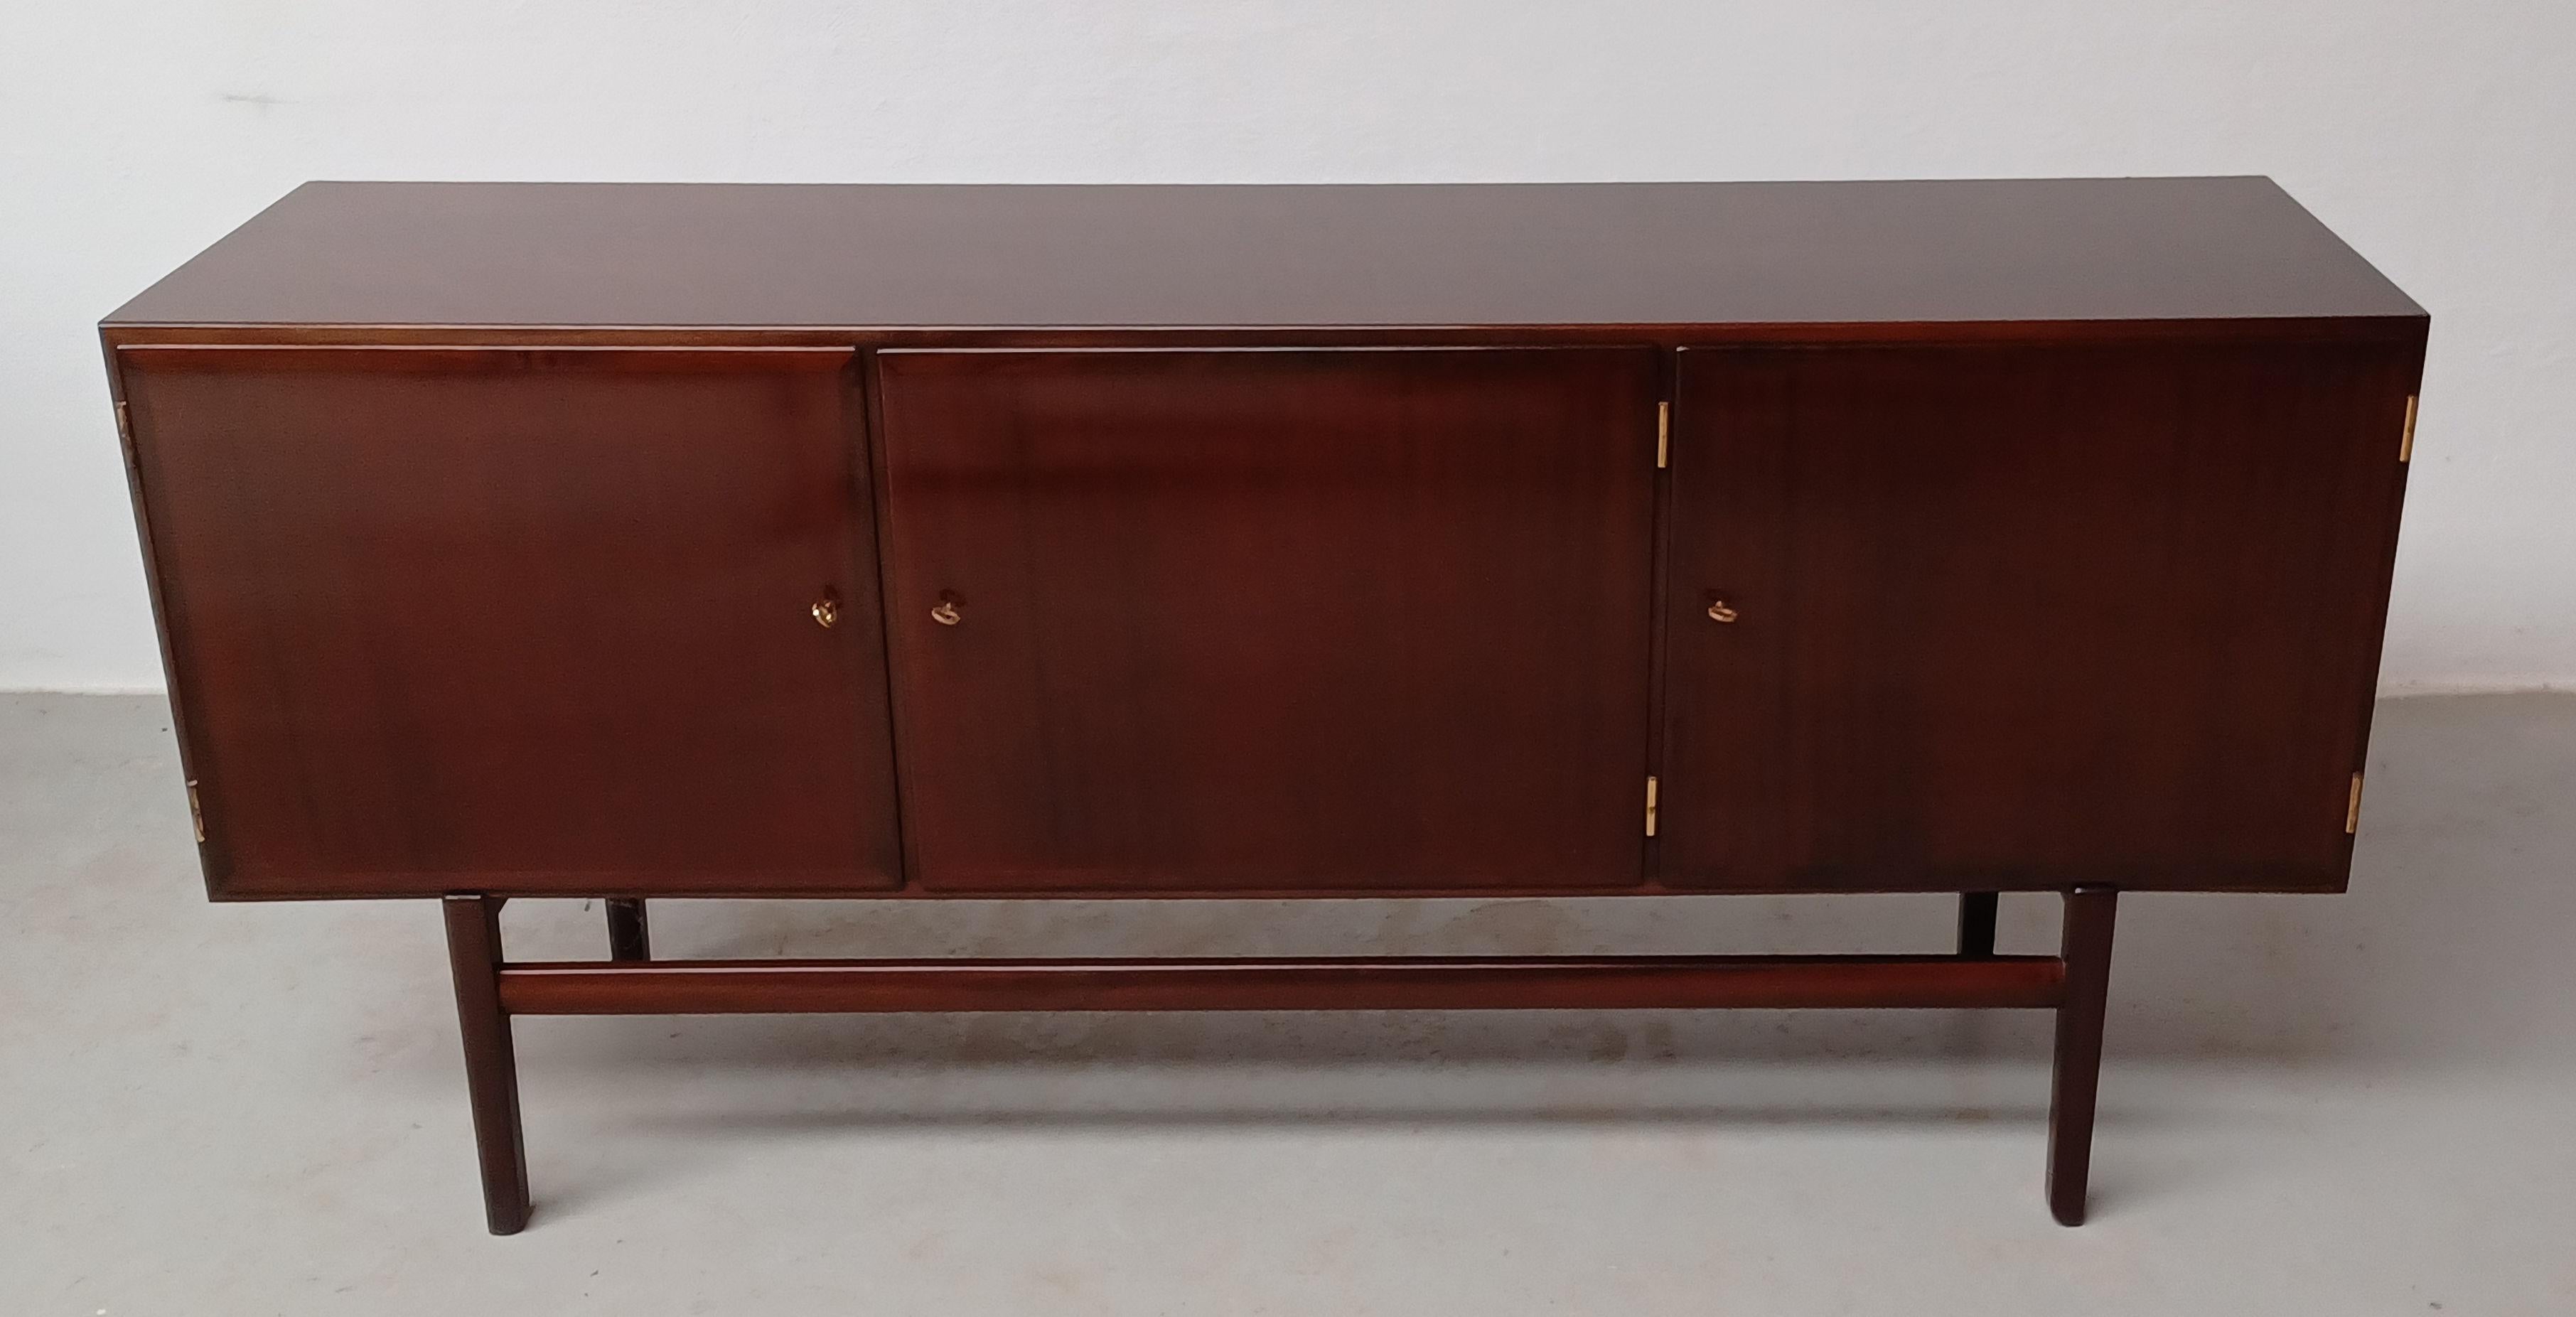 Ole Wanscher Fully Restored and Refinished Rungstedlund Sideboard

The elegant and spacious sideboard with it's minimalistic yet exquisite luxury expression is part of the Rungstedlund dining furniture series designed by Ole Wanscher and named after